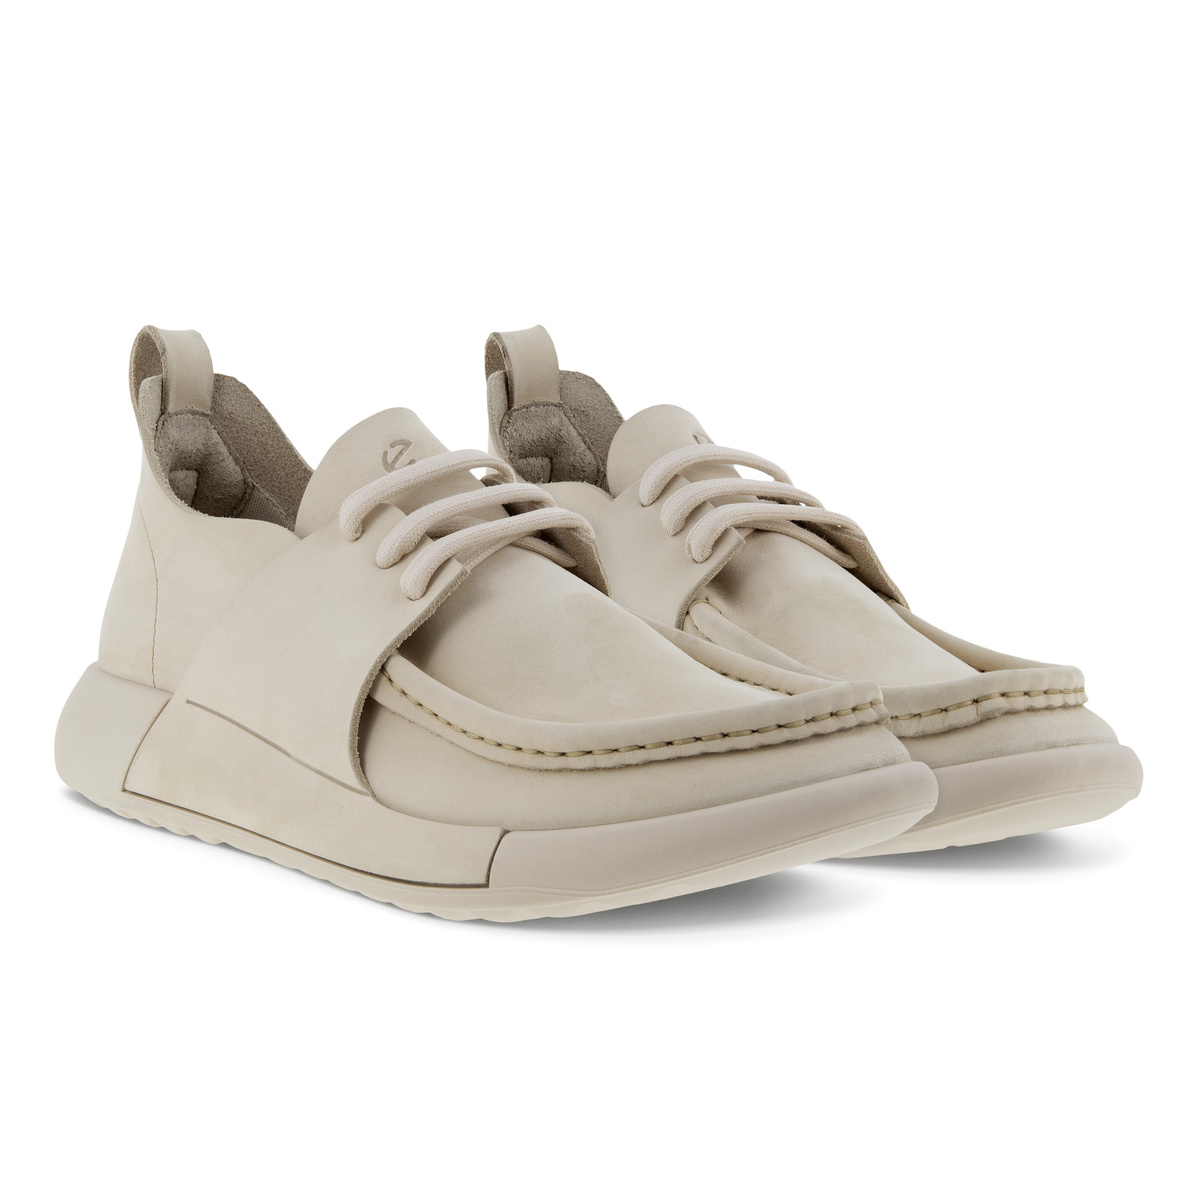 Shelly Leather Toddler Sandals in White | Number One Shoes